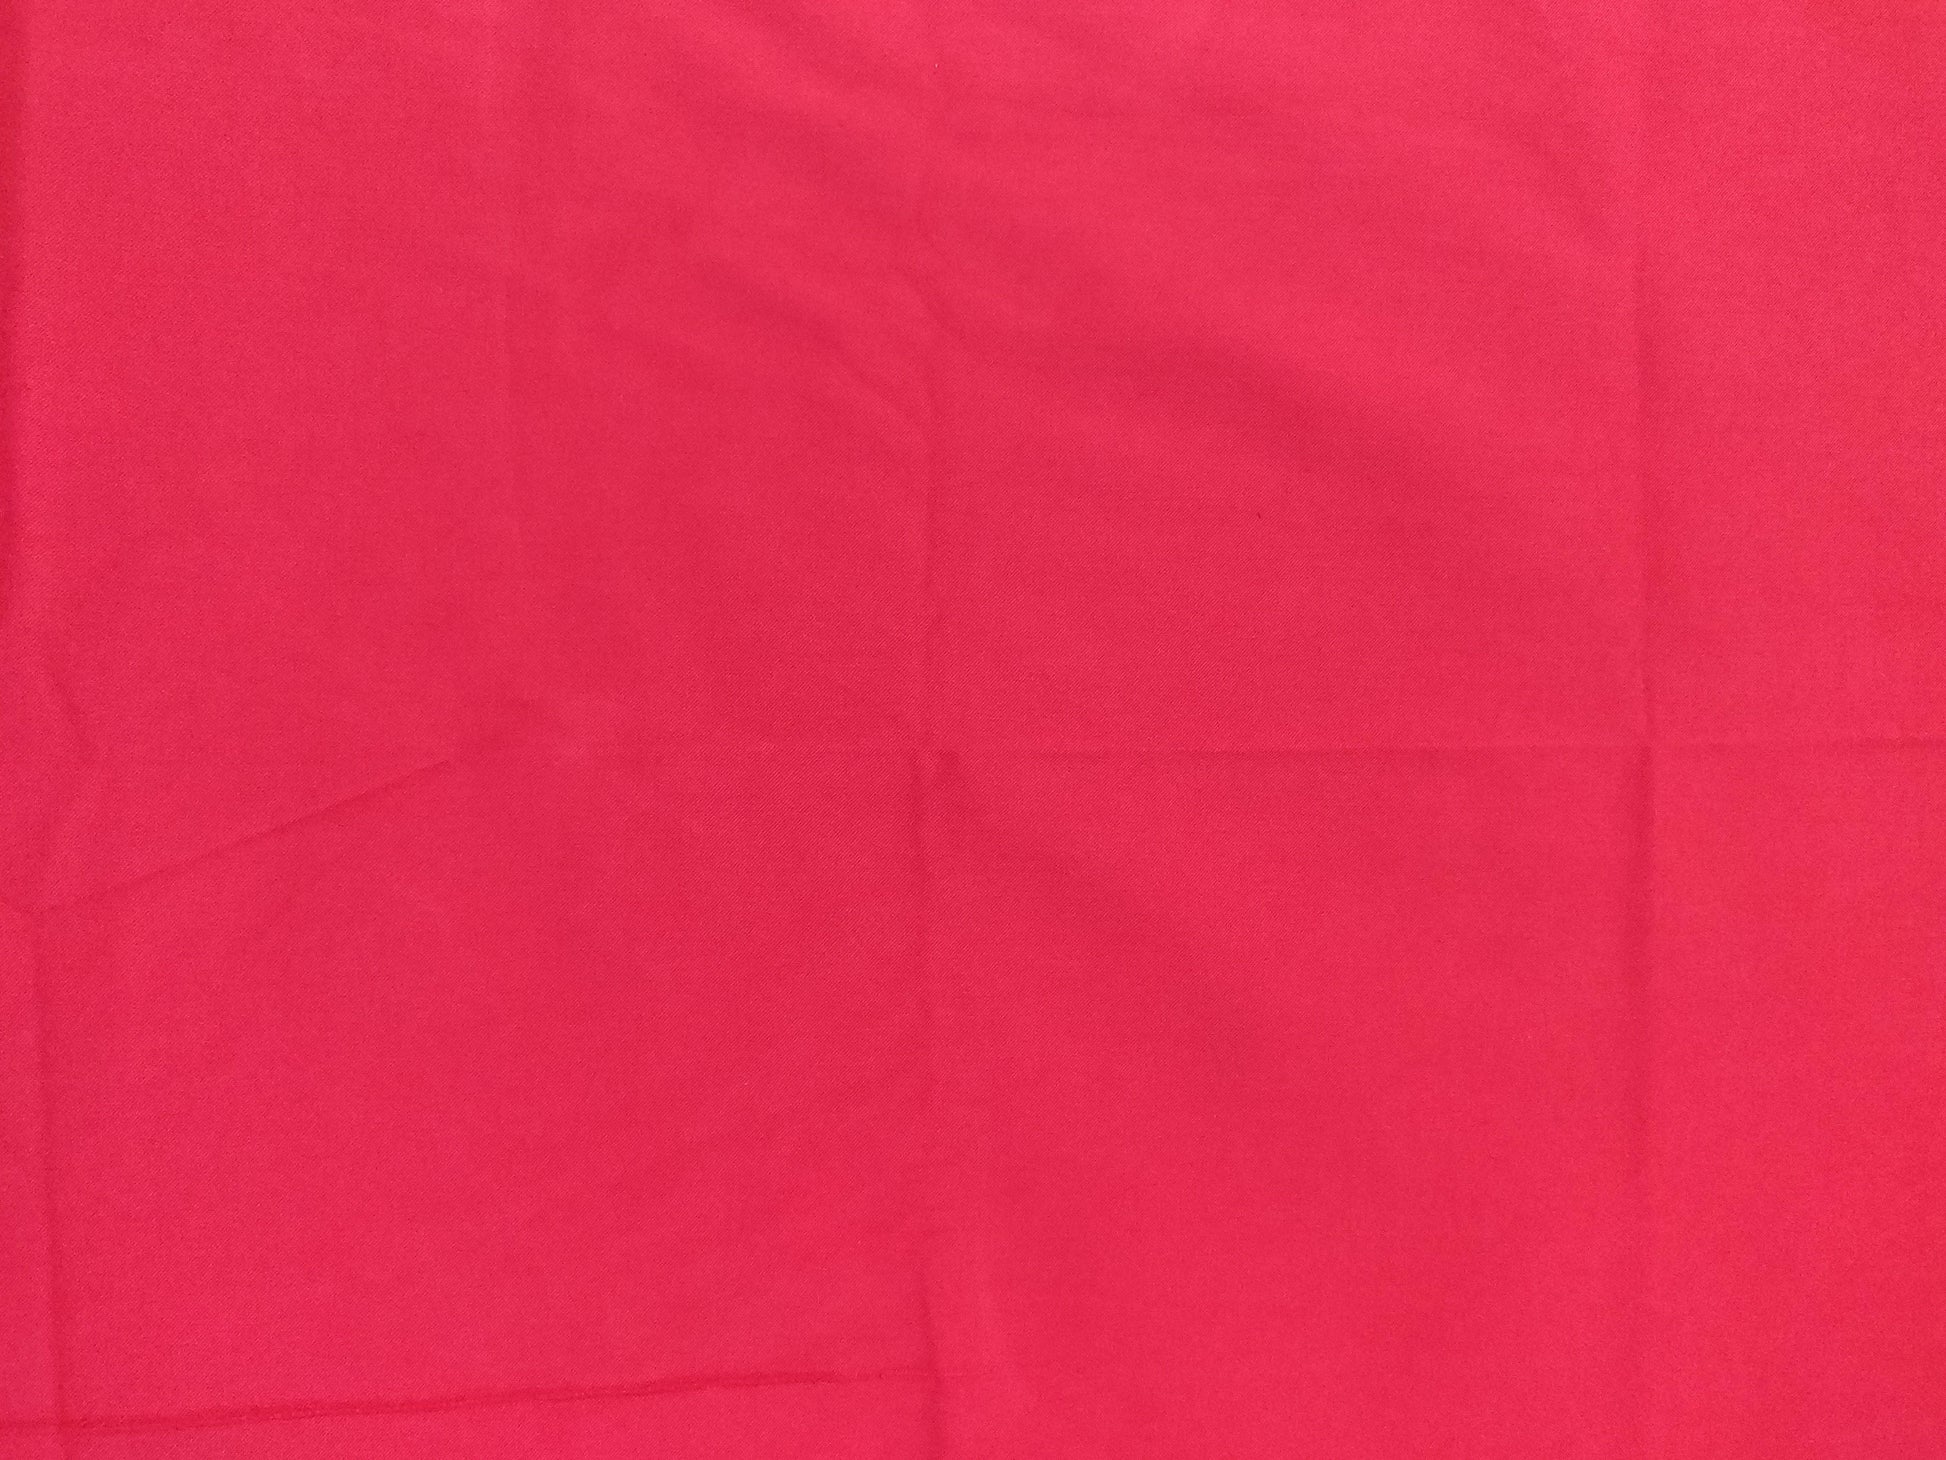 Red Lycra Cotton Solid Red Fabric Pre cut 1 Meter FAB78-Anvi Creations-Fabric